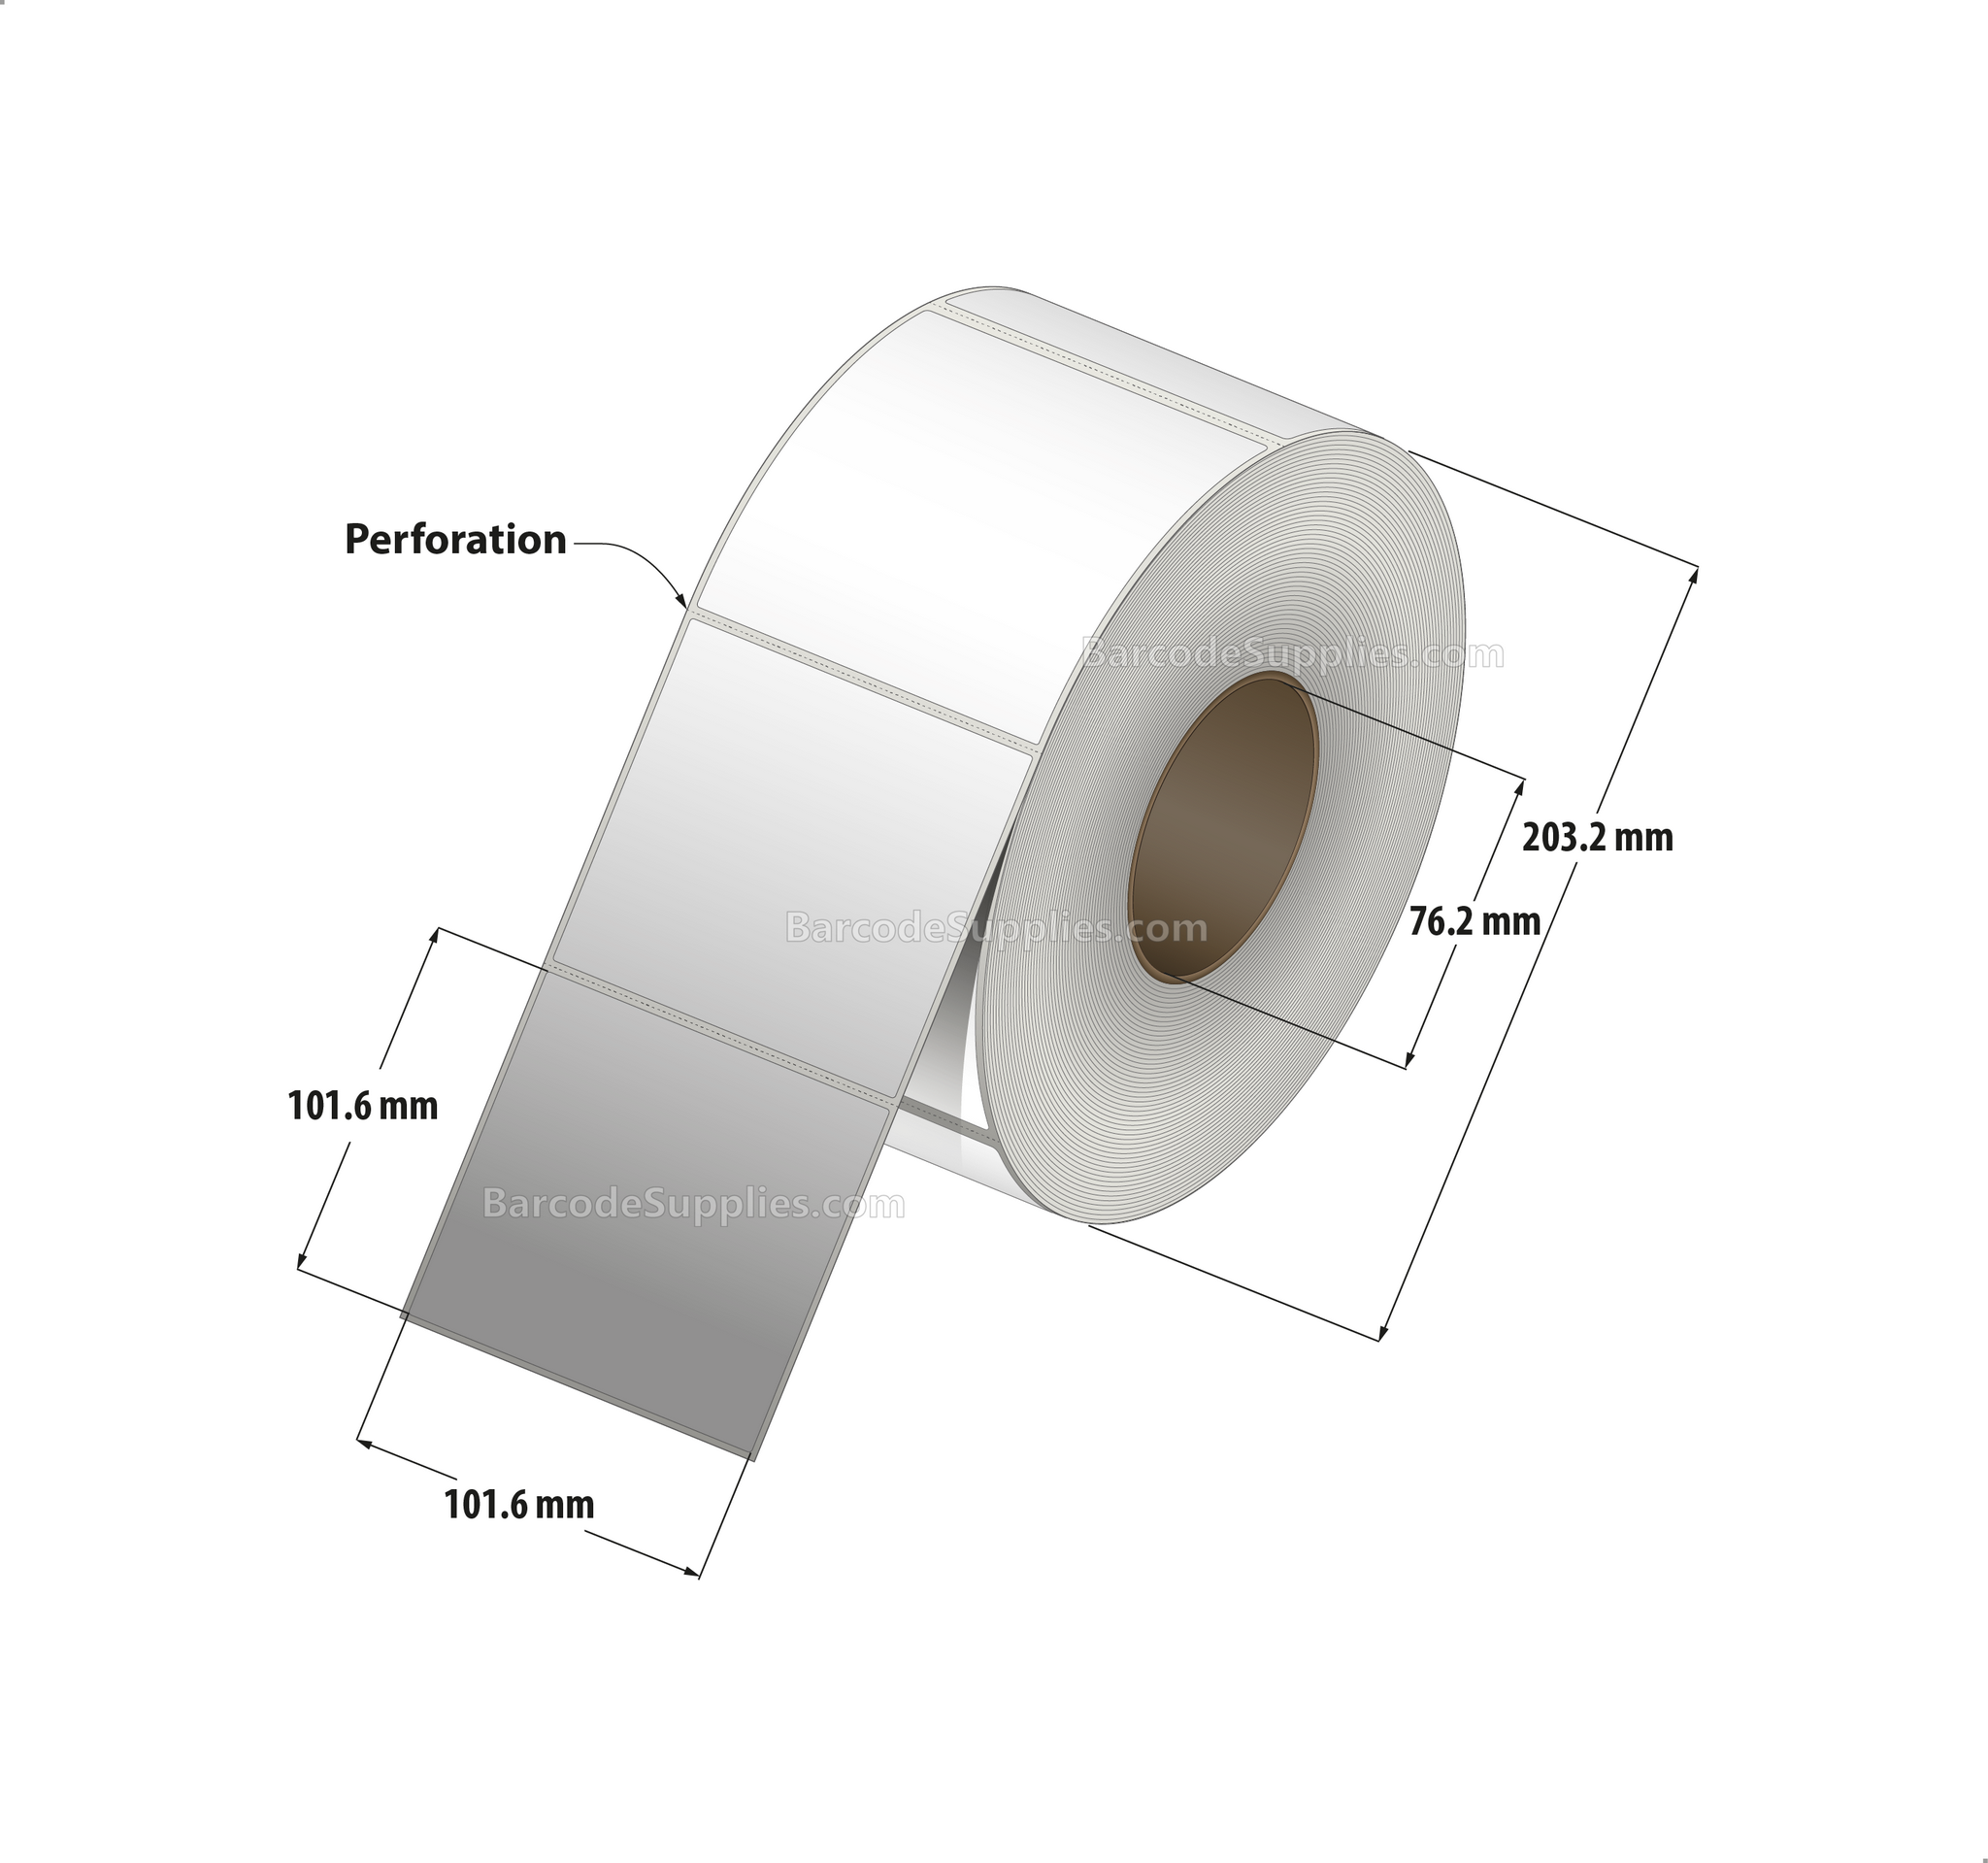 4 x 4 Direct Thermal White Labels With Acrylic Adhesive - Perforated - 1500 Labels Per Roll - Carton Of 4 Rolls - 6000 Labels Total - MPN: RD-4-4-1500-3 - BarcodeSource, Inc.